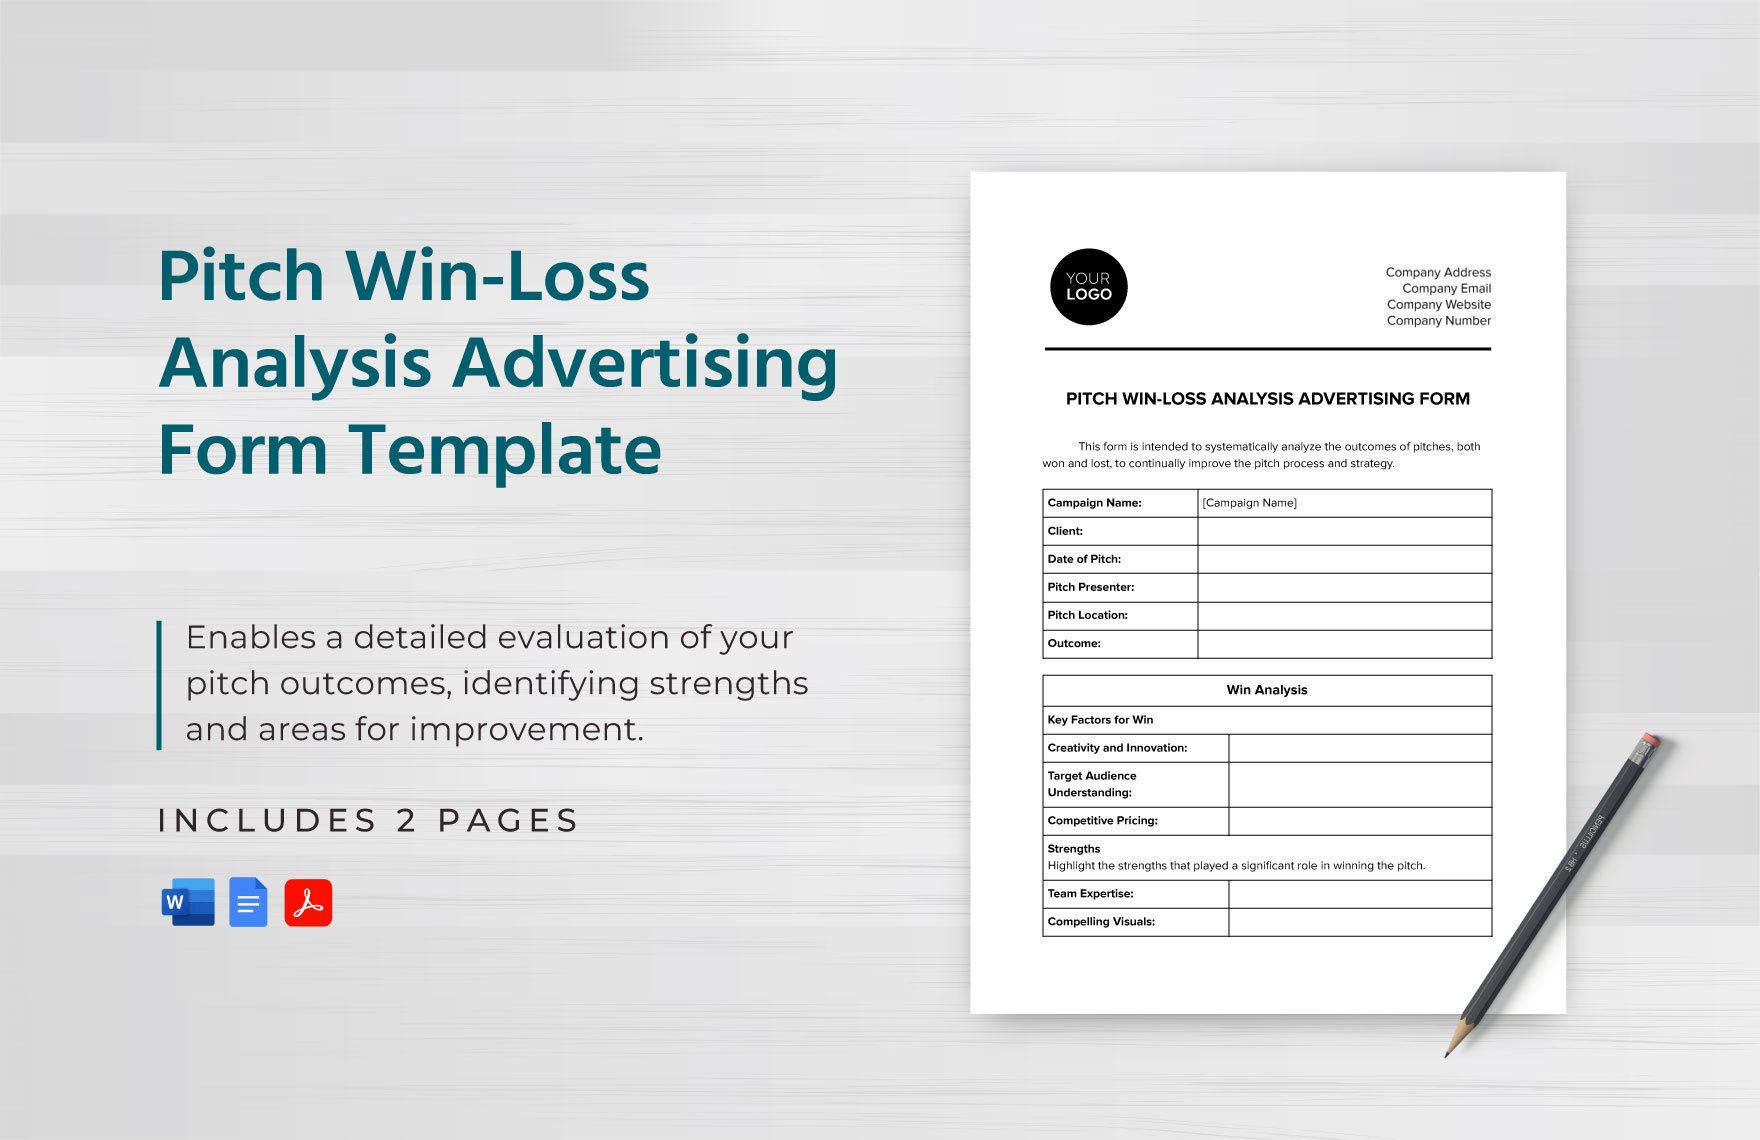 Pitch Win-Loss Analysis Advertising Form Template in Word, Google Docs, PDF